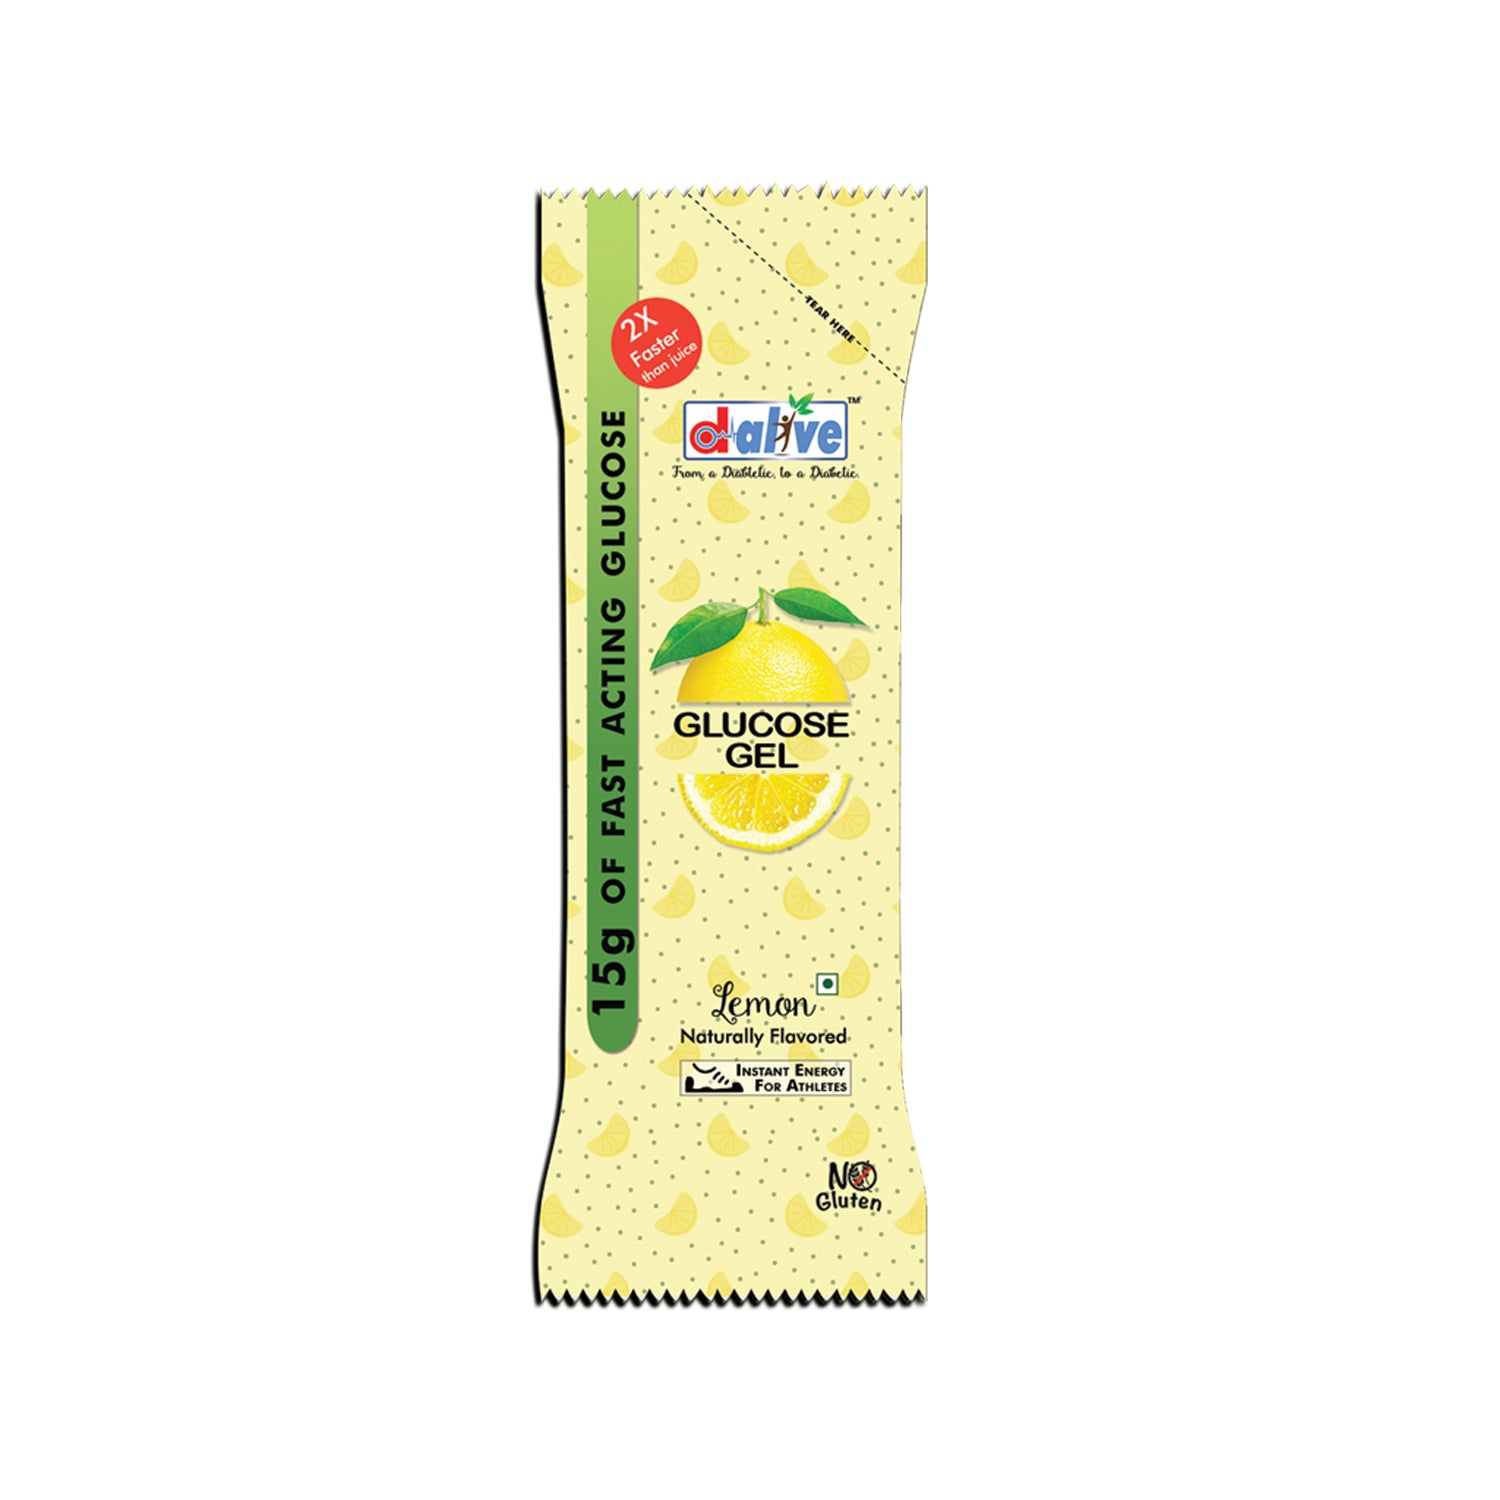 D-Alive 15g of Fast Acting Glucose Gel for treating Hypoglycaemia - Instant Energy Total 3 Pocket Size Sachet: 30g Each